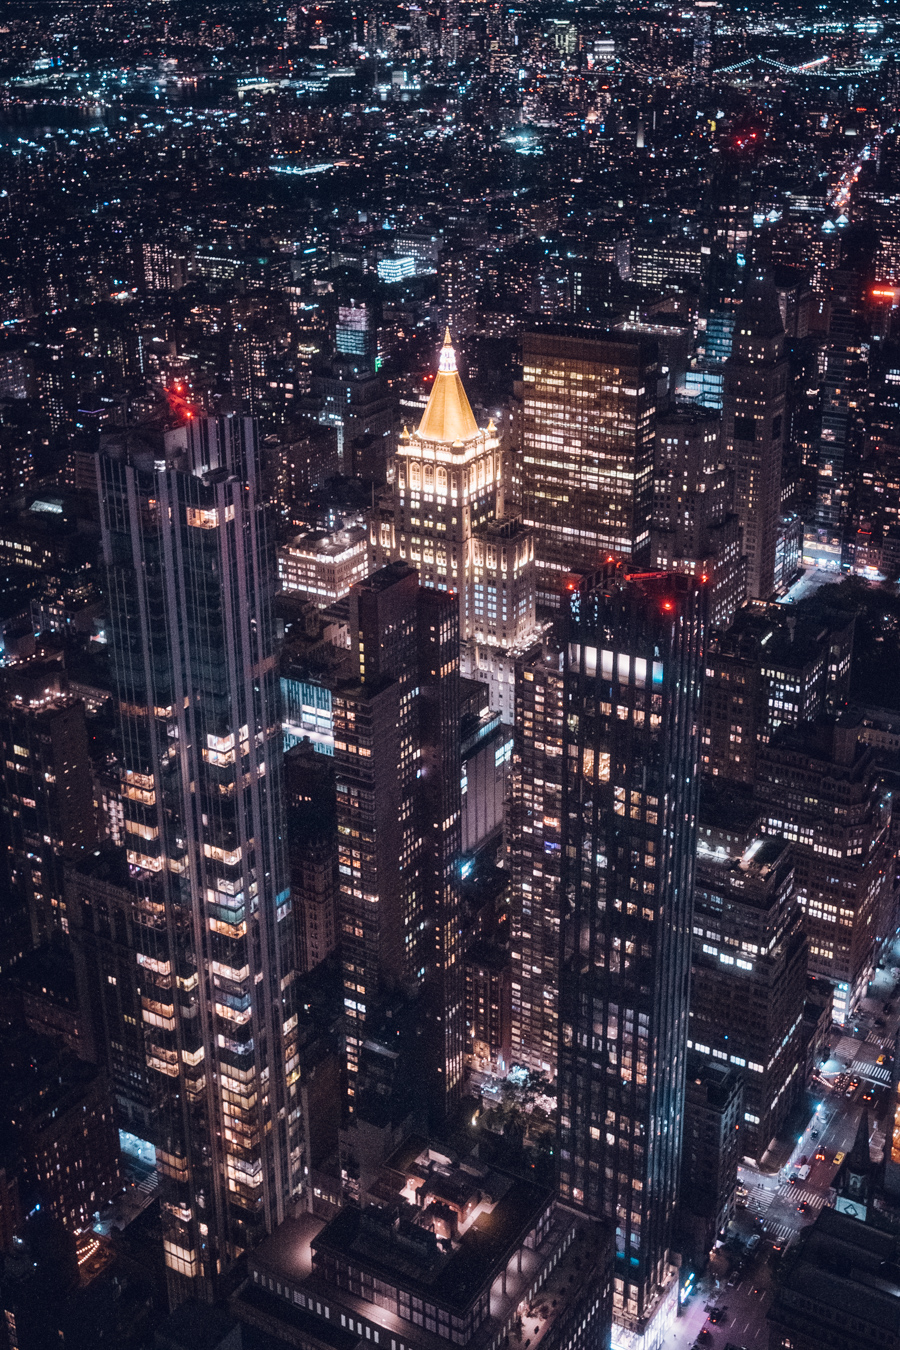 Photograph of Manhattan by night, taken from the Empire State Building, New York by Alex Nichol